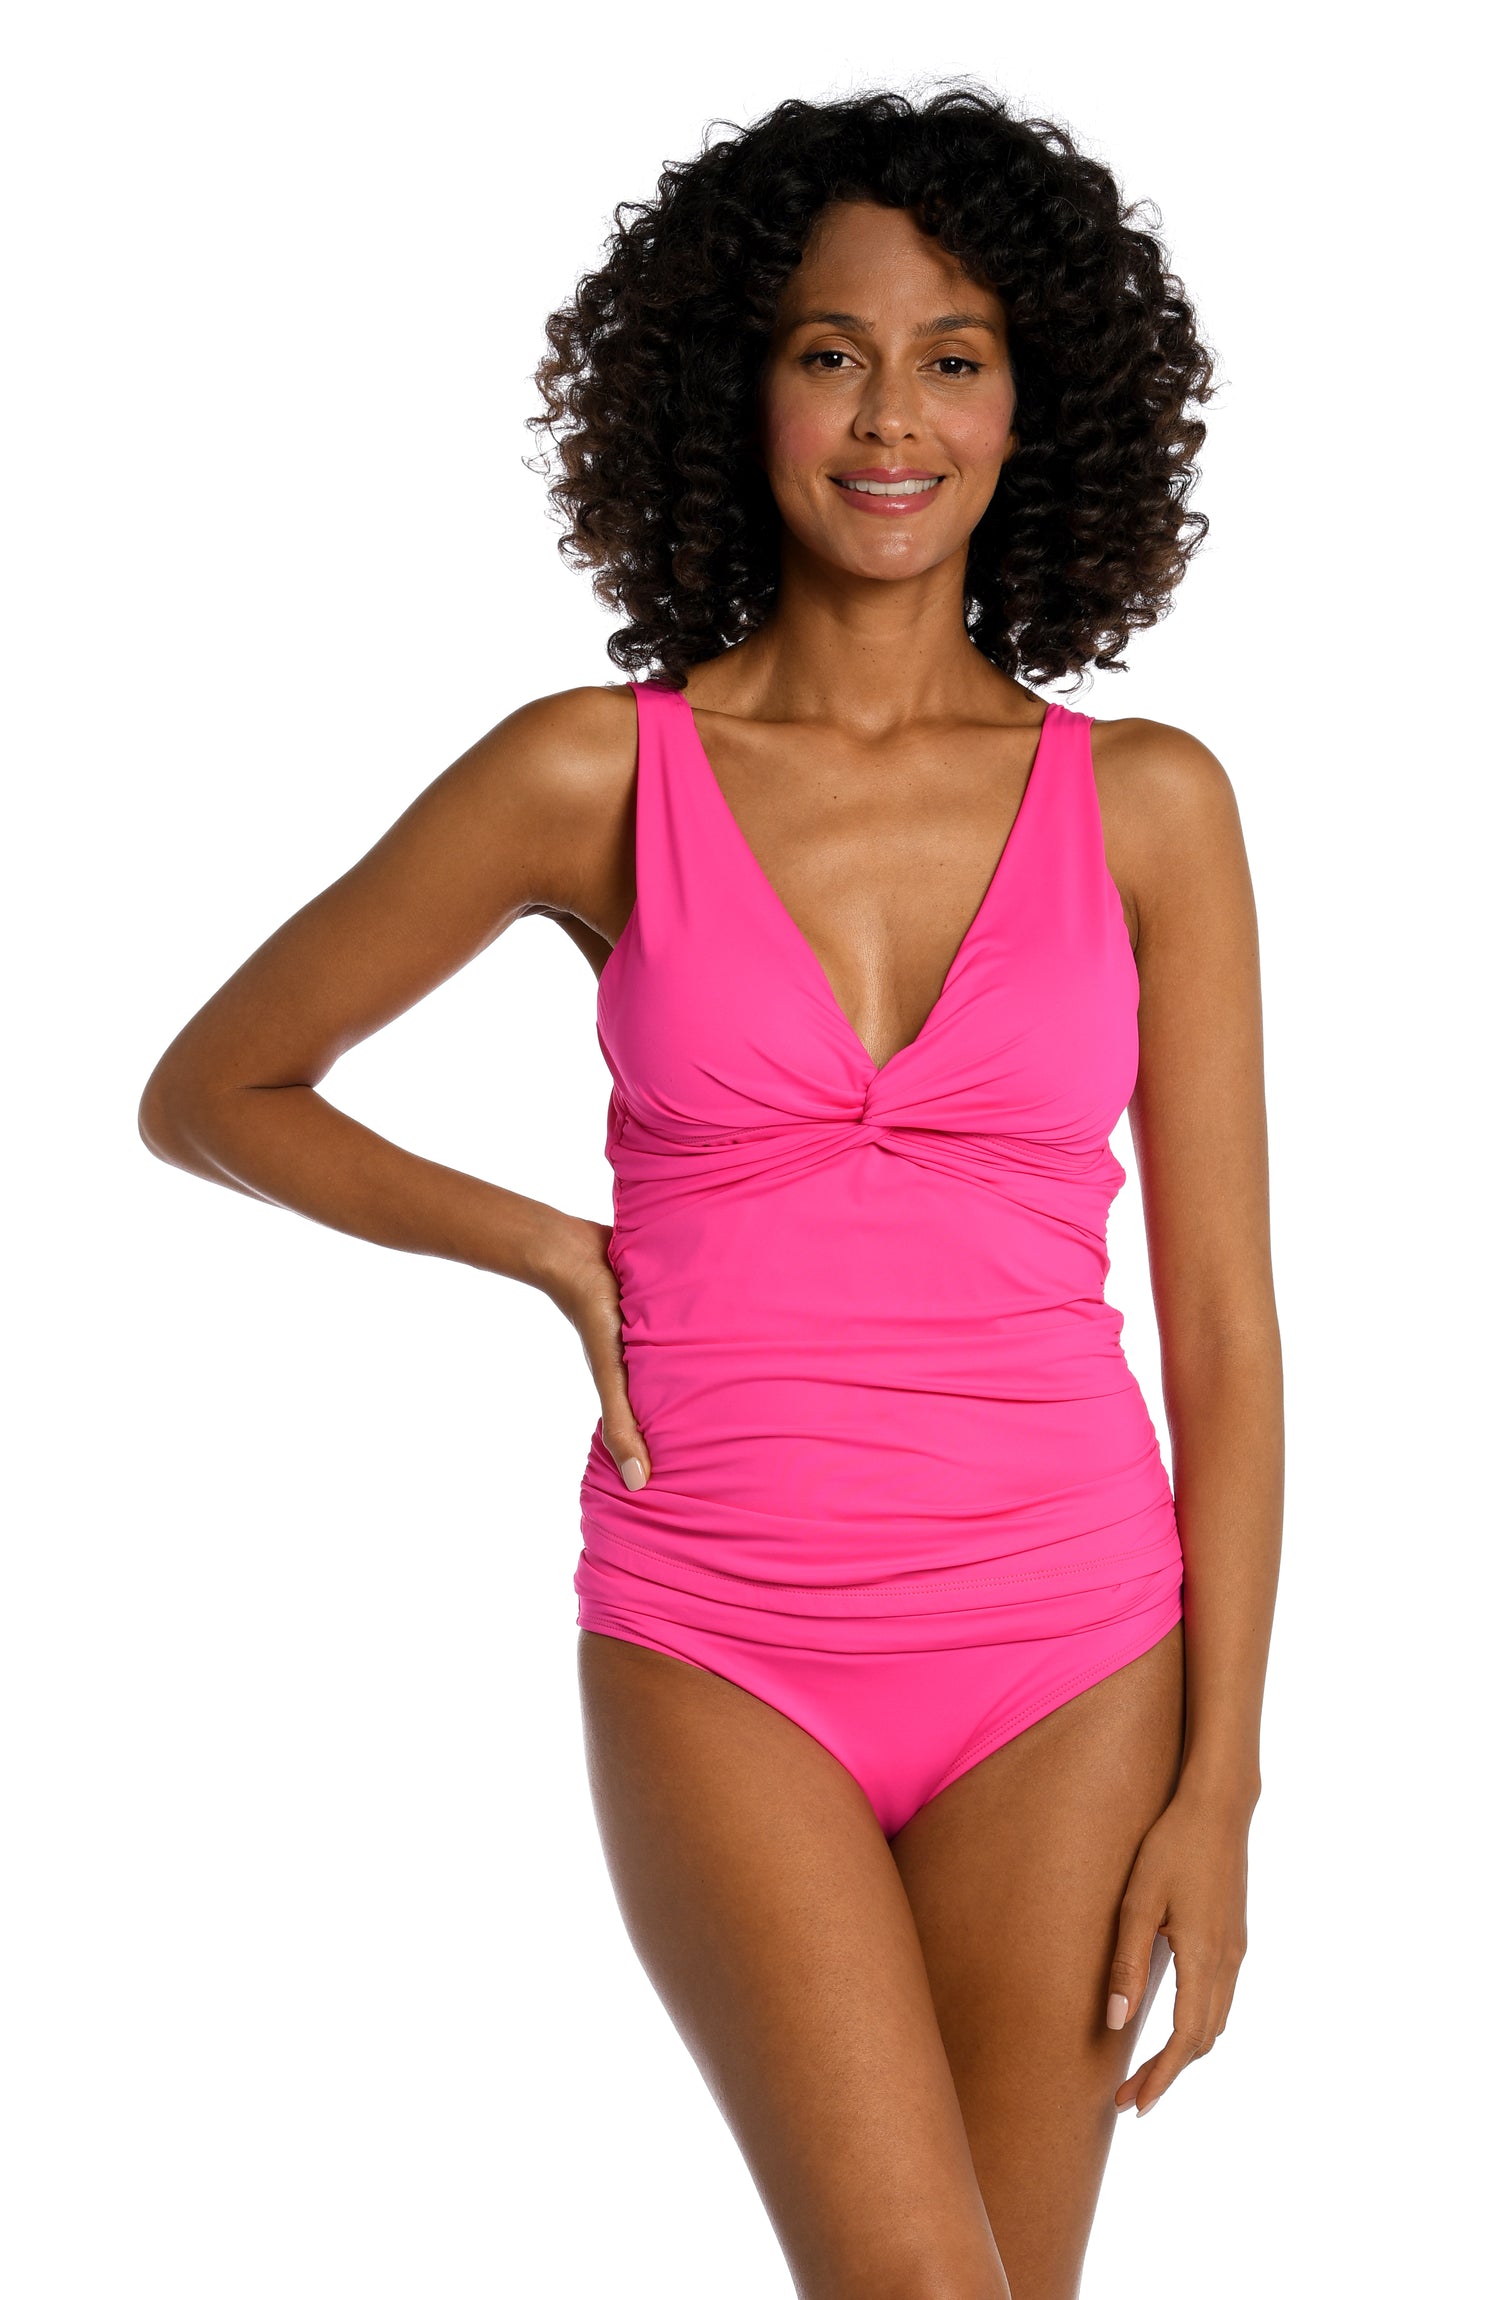 Model is wearing a pop pink colored tankini swimsuit top from our Best-Selling Island Goddess collection.